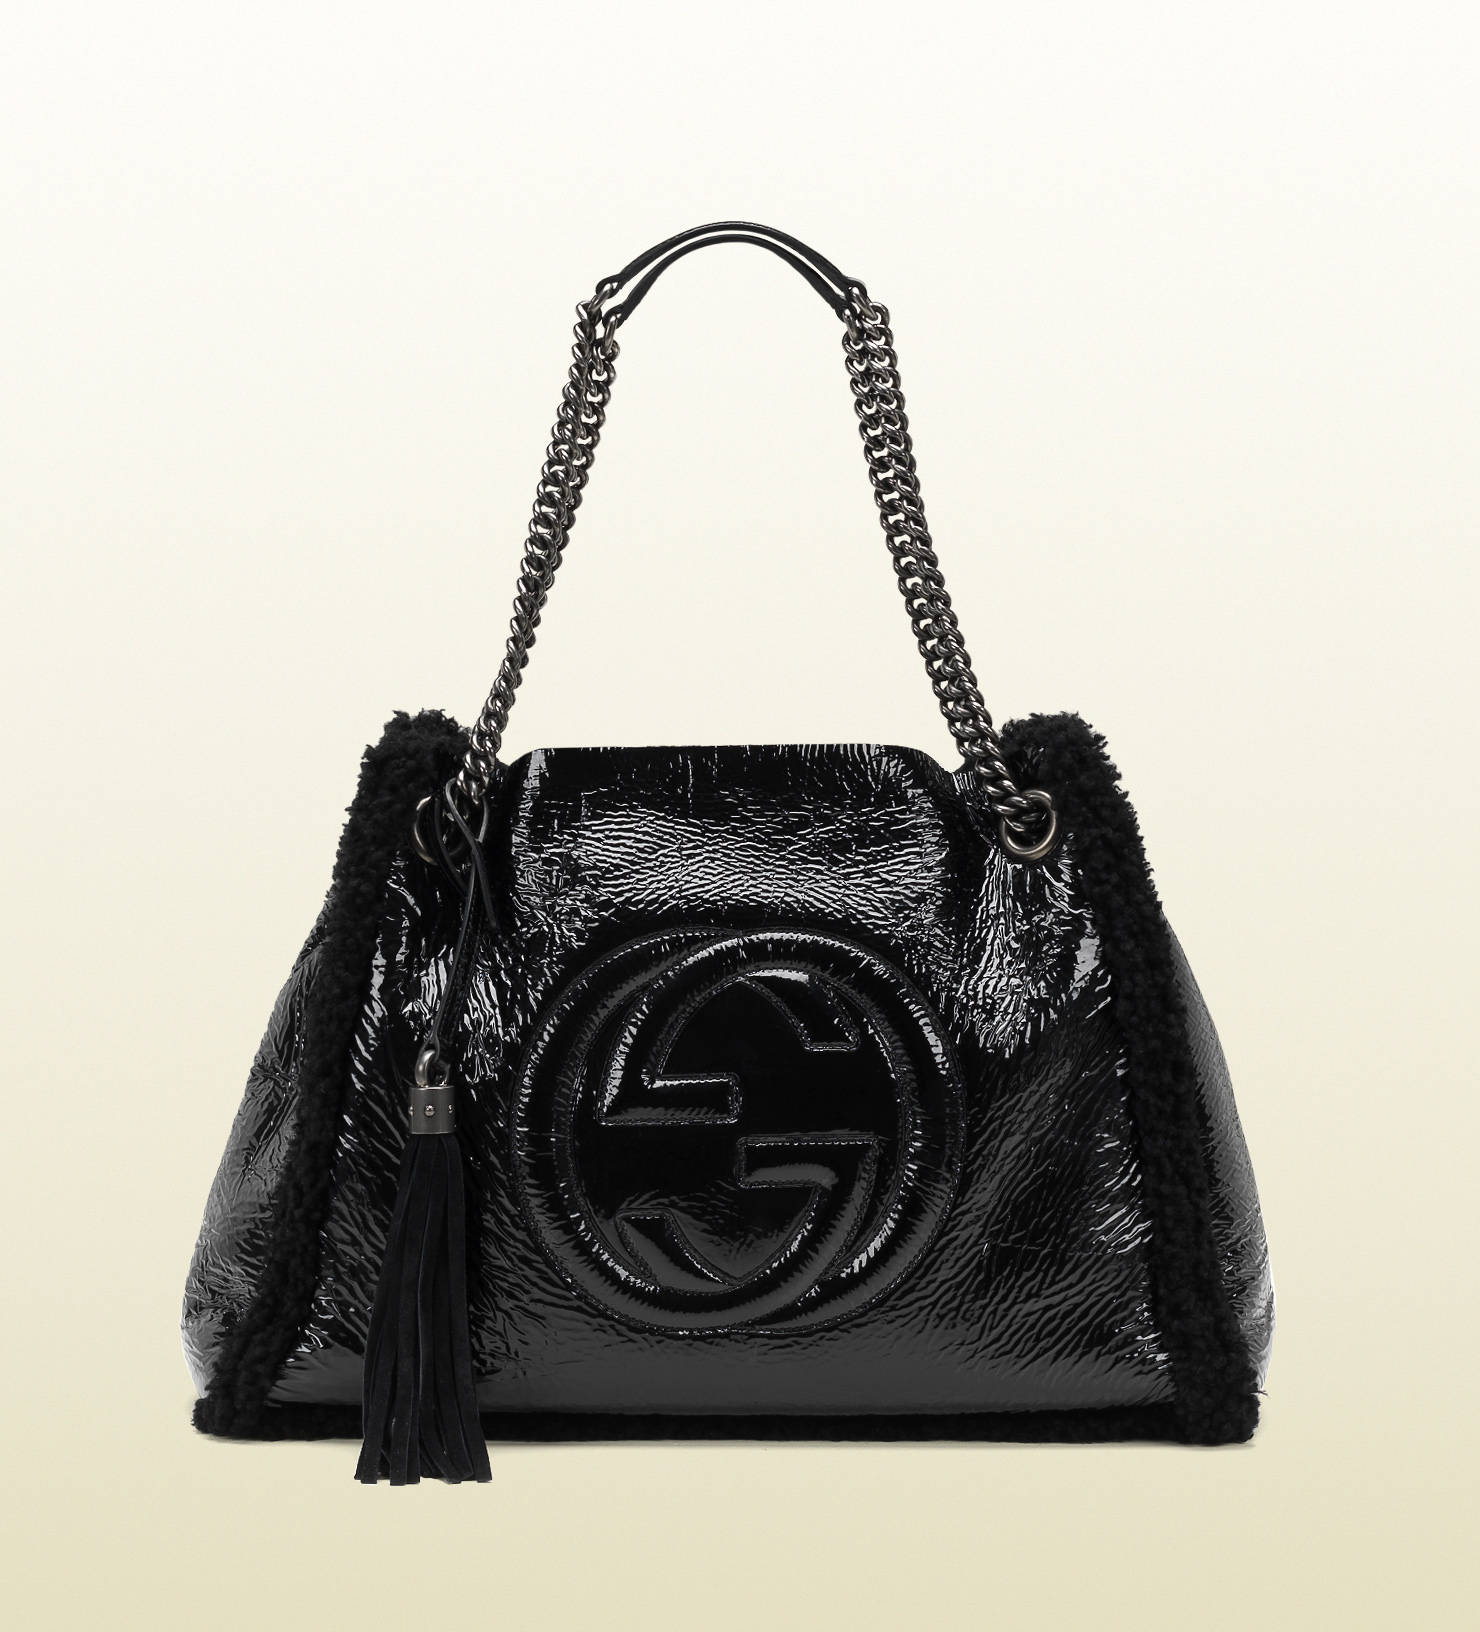 Lyst - Gucci Soho Crushed Patent Leather Shoulder Bag in Black